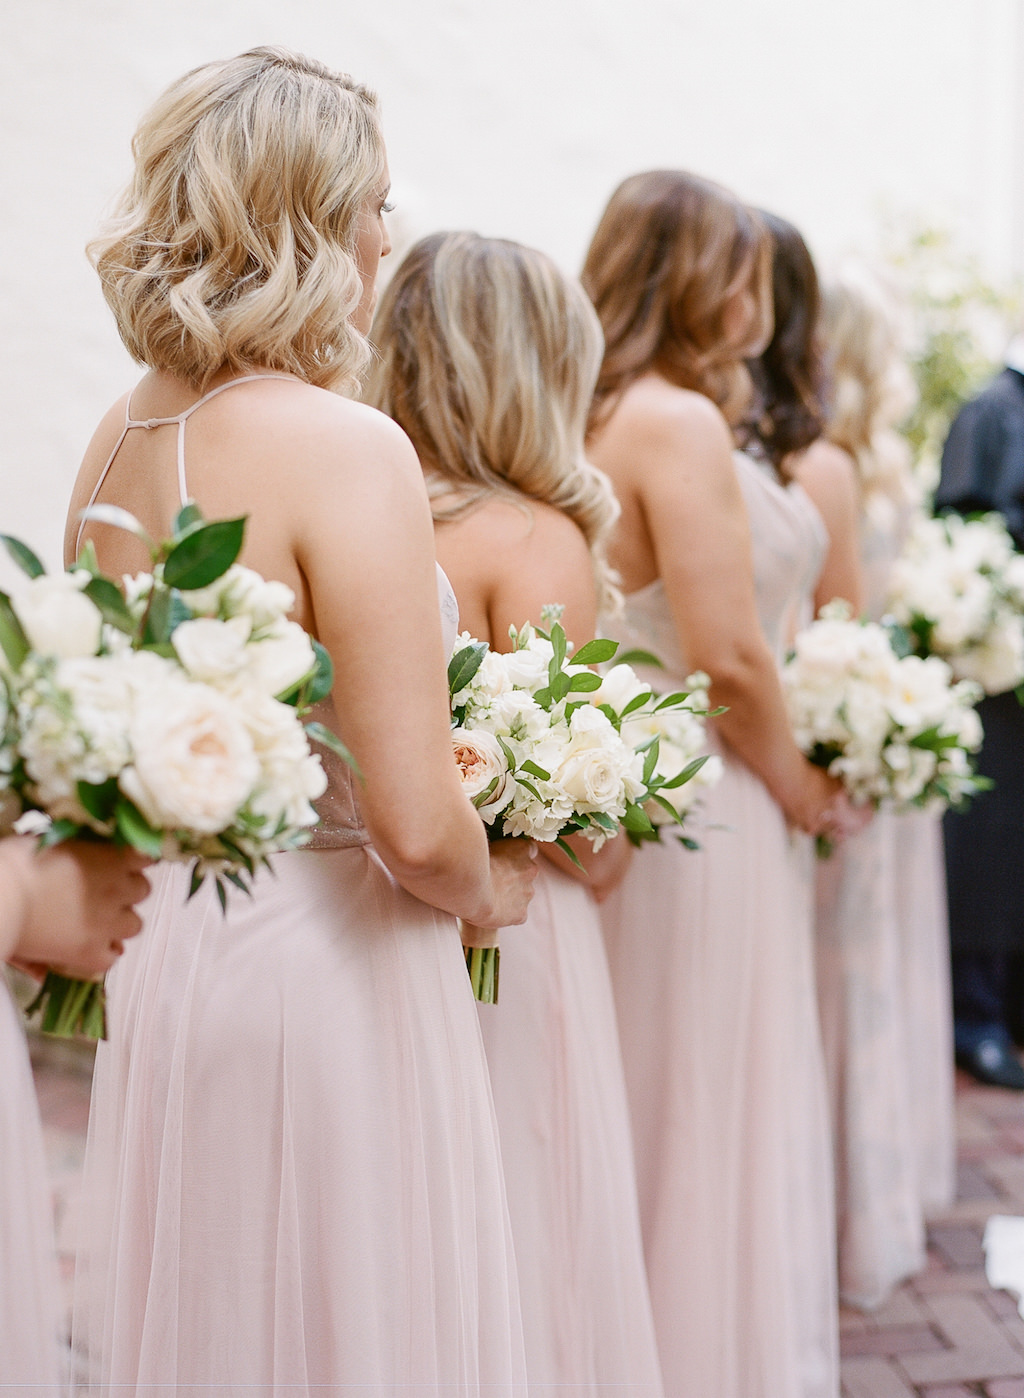 Florida Bridesmaids in Mix and Match Blush Pink Hayley Paige Dresses Holding Garden Inspired Classic White, Ivory and Blush Pink with Greenery Floral Bouquets Wedding Ceremony Portrait